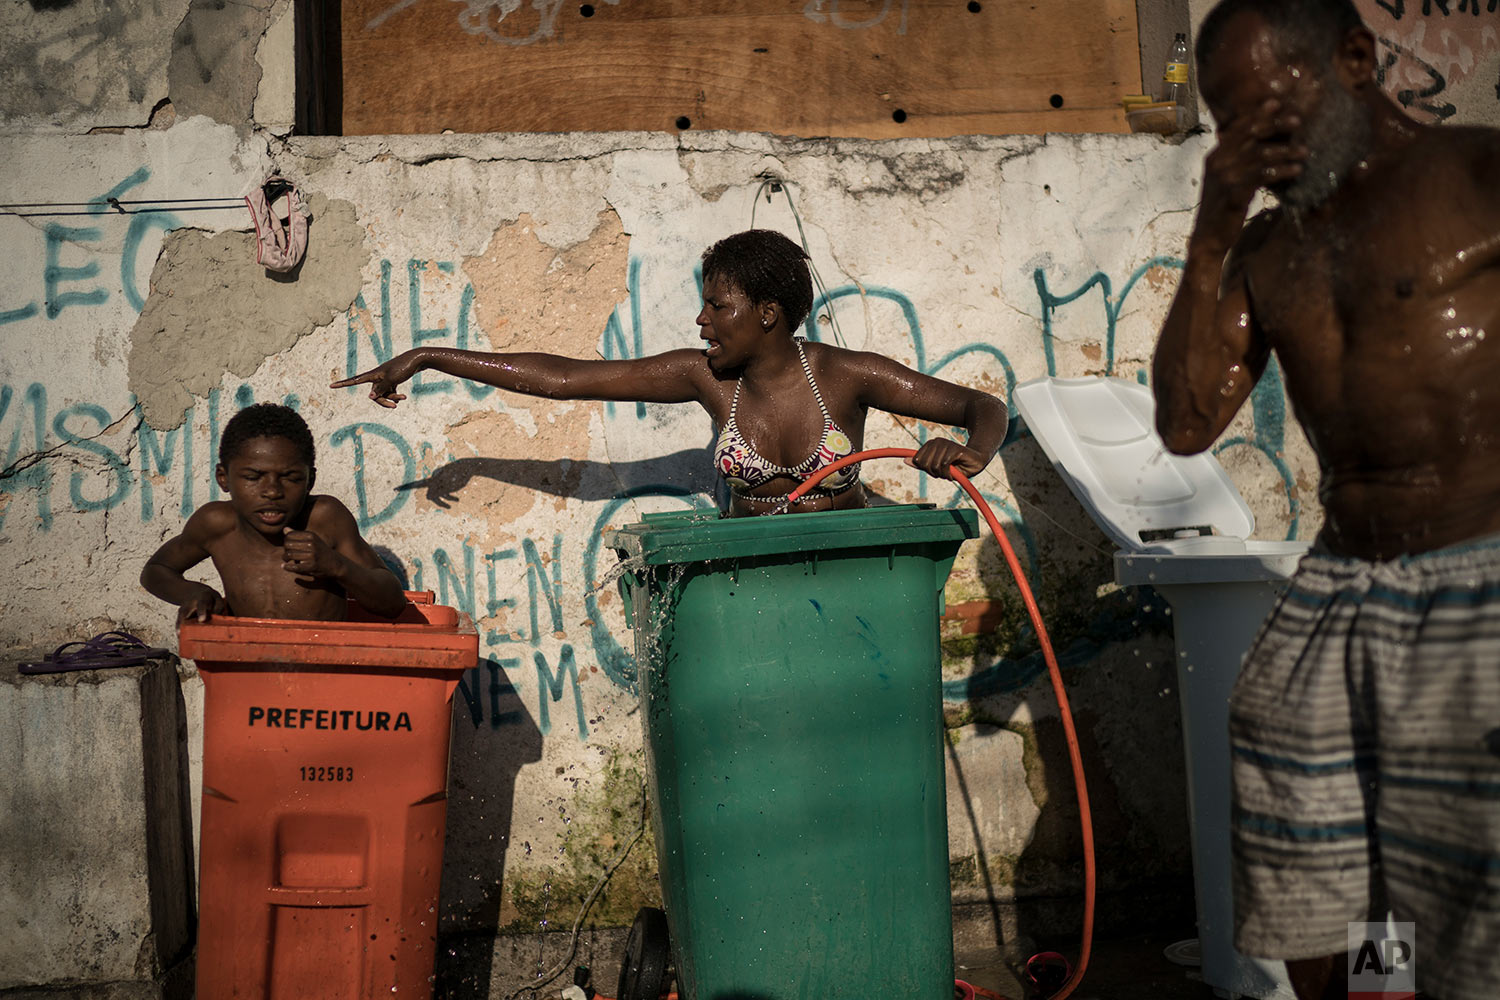  In this Sept. 11, 2017 photo, a woman and youth use tall trash containers to shower outside their squatter building that used to house the Brazilian Institute of Geography and Statistics (IBGE) in the Mangueira slum of Rio de Janeiro, Brazil. The World Bank estimates that between the start of 2016 and the end of this year, 2.5 million to 3.6 million Brazilians will have fallen back below the poverty line of 140 Brazilian reais per month, about $44 at current exchange rates. (AP Photo/Felipe Dana) 